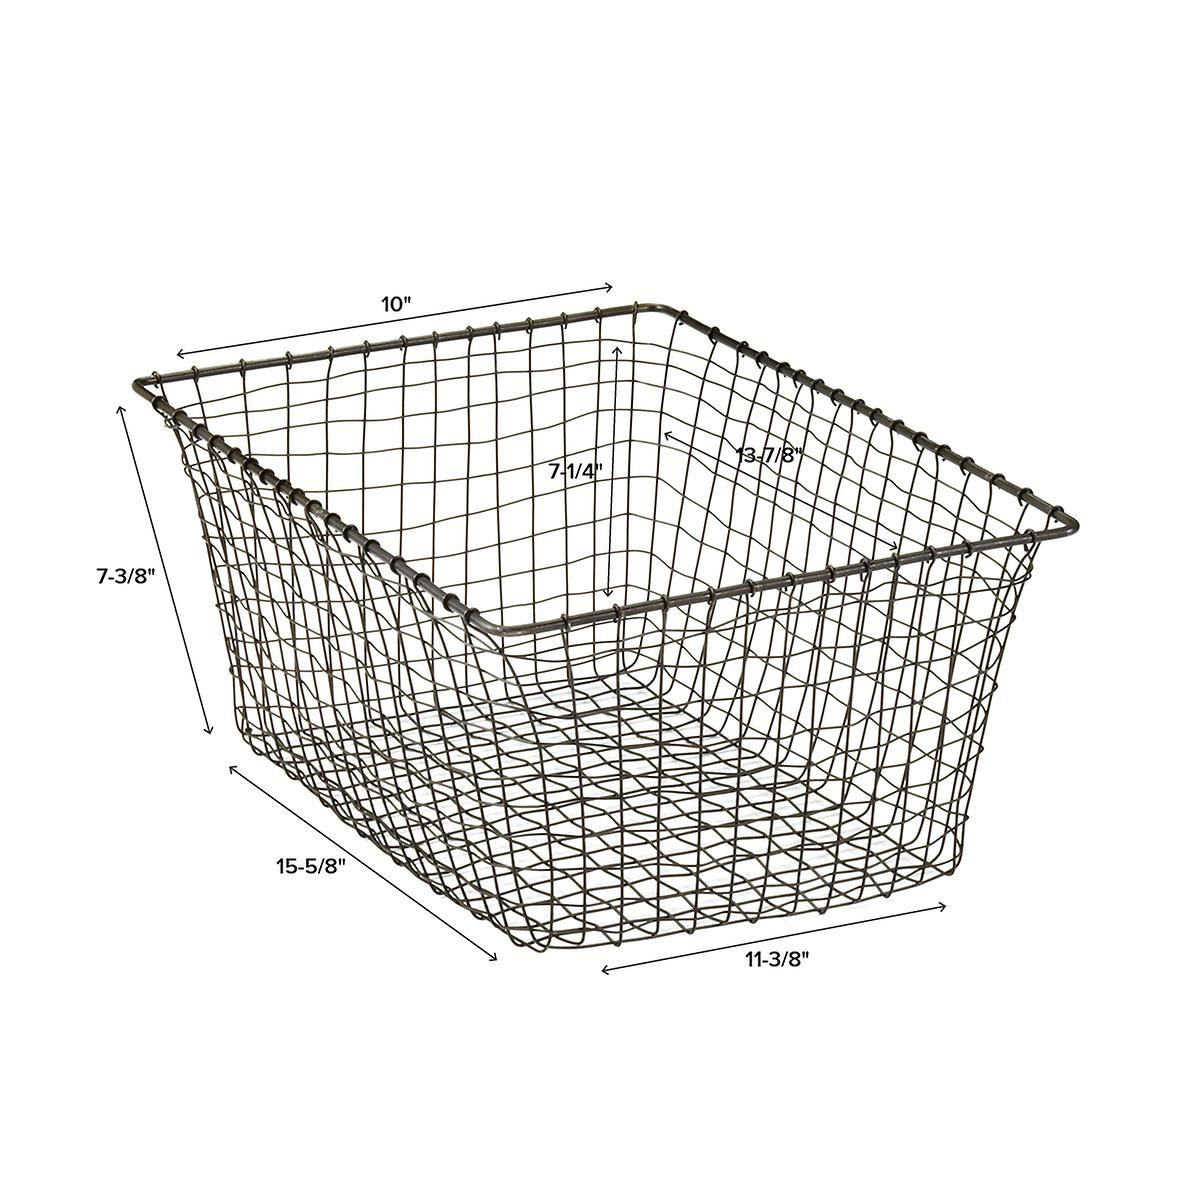 Rustic Marché Steel Wire Storage Baskets | The Container Store